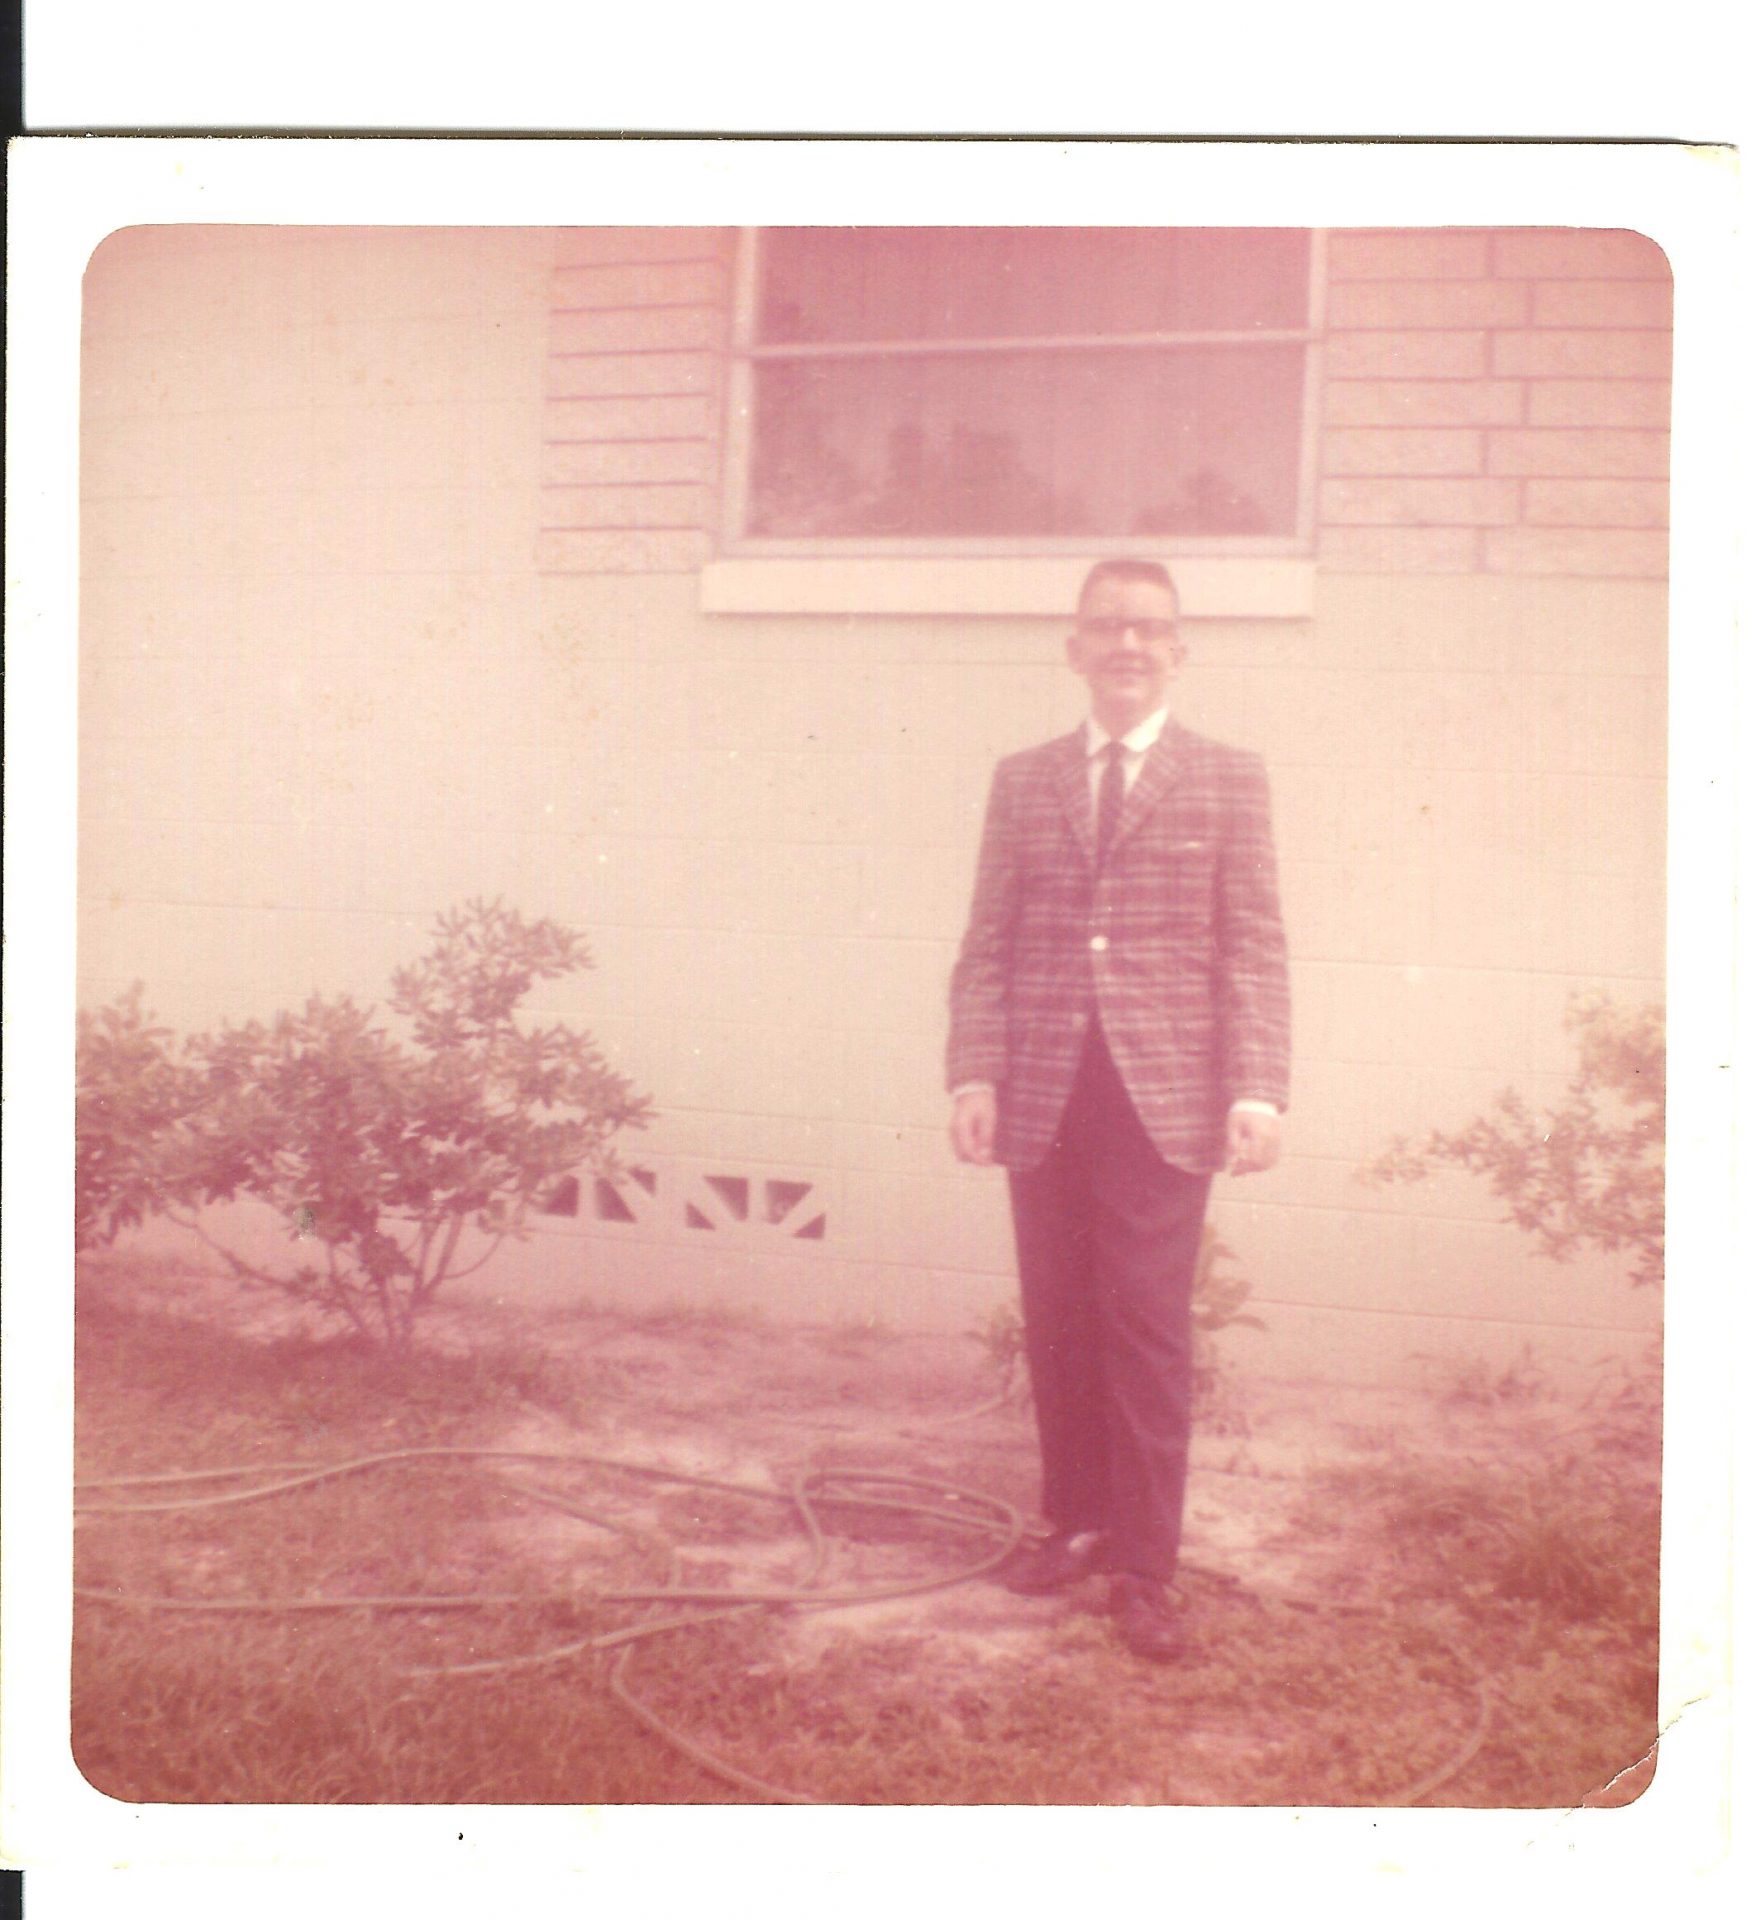 Victor with a crew cut at Easter in 1960's